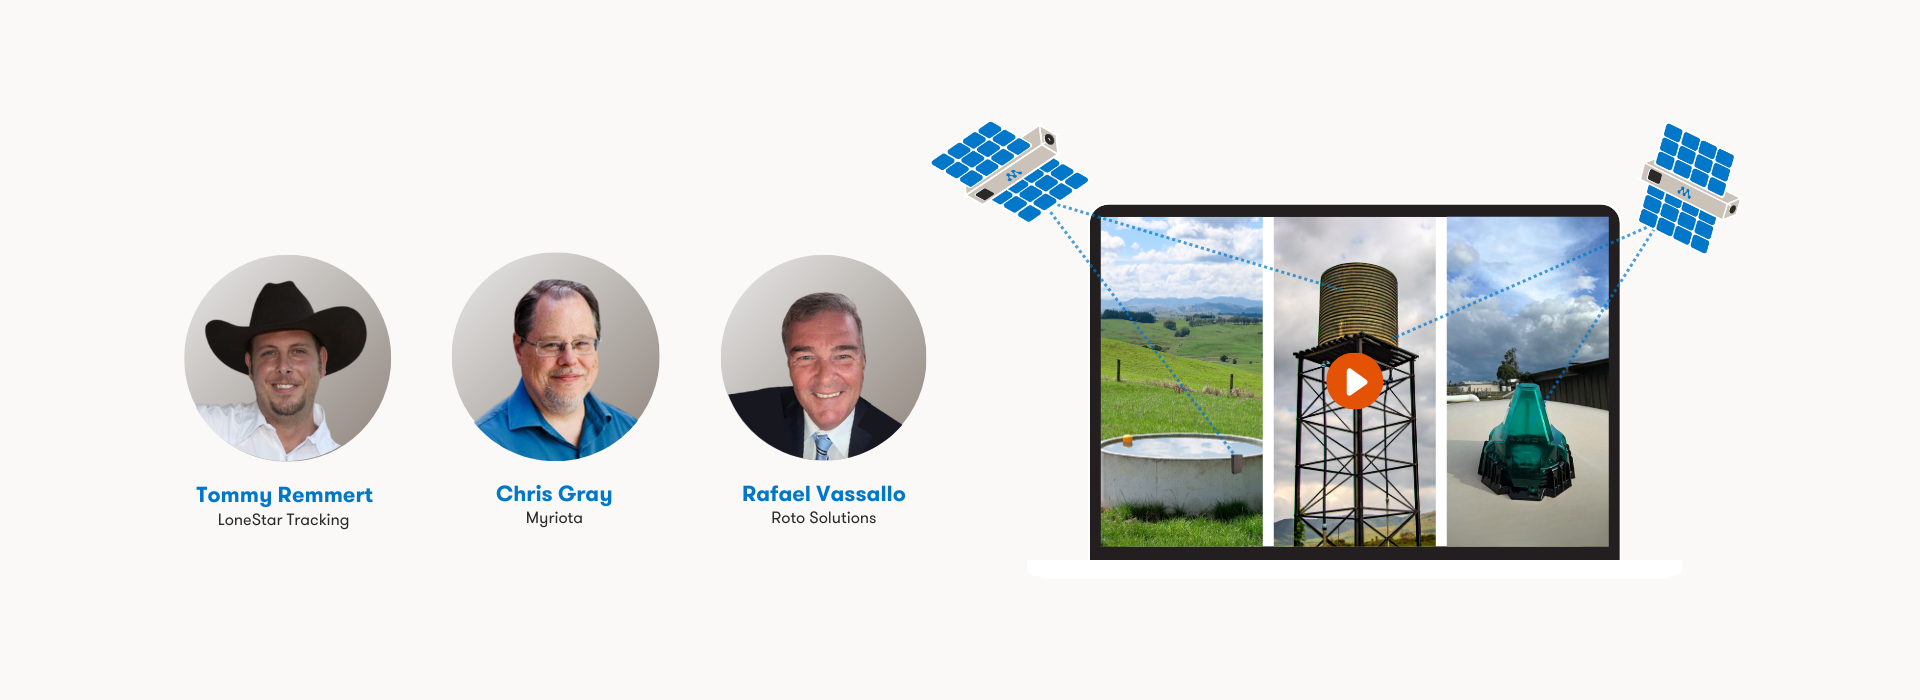 Website banner promoting a thought leadership webinar on tank monitoring featuring headshots of the panel of speakers from Myriota, LoneStar Tracking and Roto Solutions.